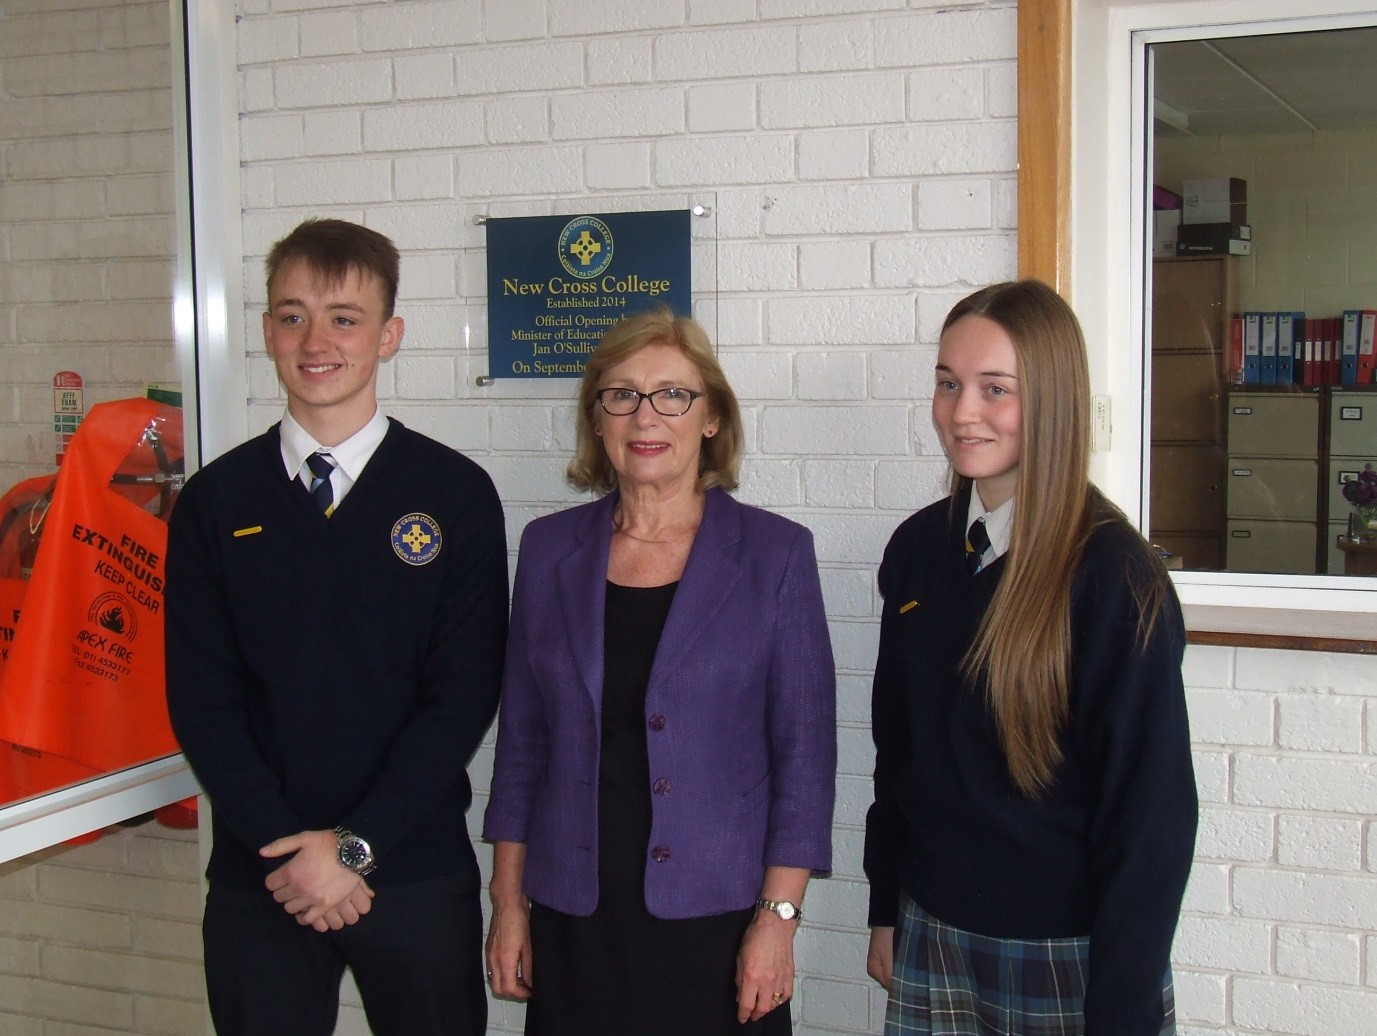 Minister launches New Cross College 1